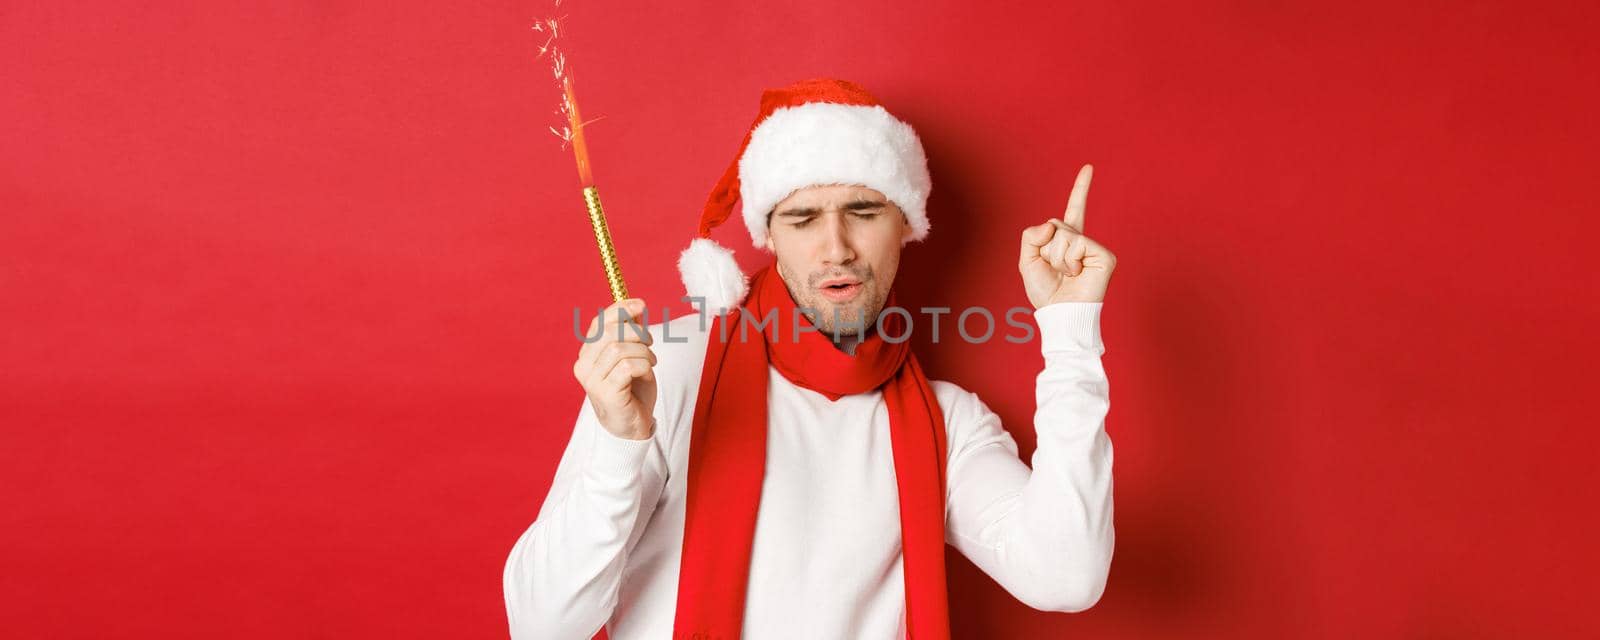 Concept of christmas, winter holidays and celebration. Attractive guy enjoying new year party, dancing with sparkler, wearing santa hat and scarf, standing over red background.